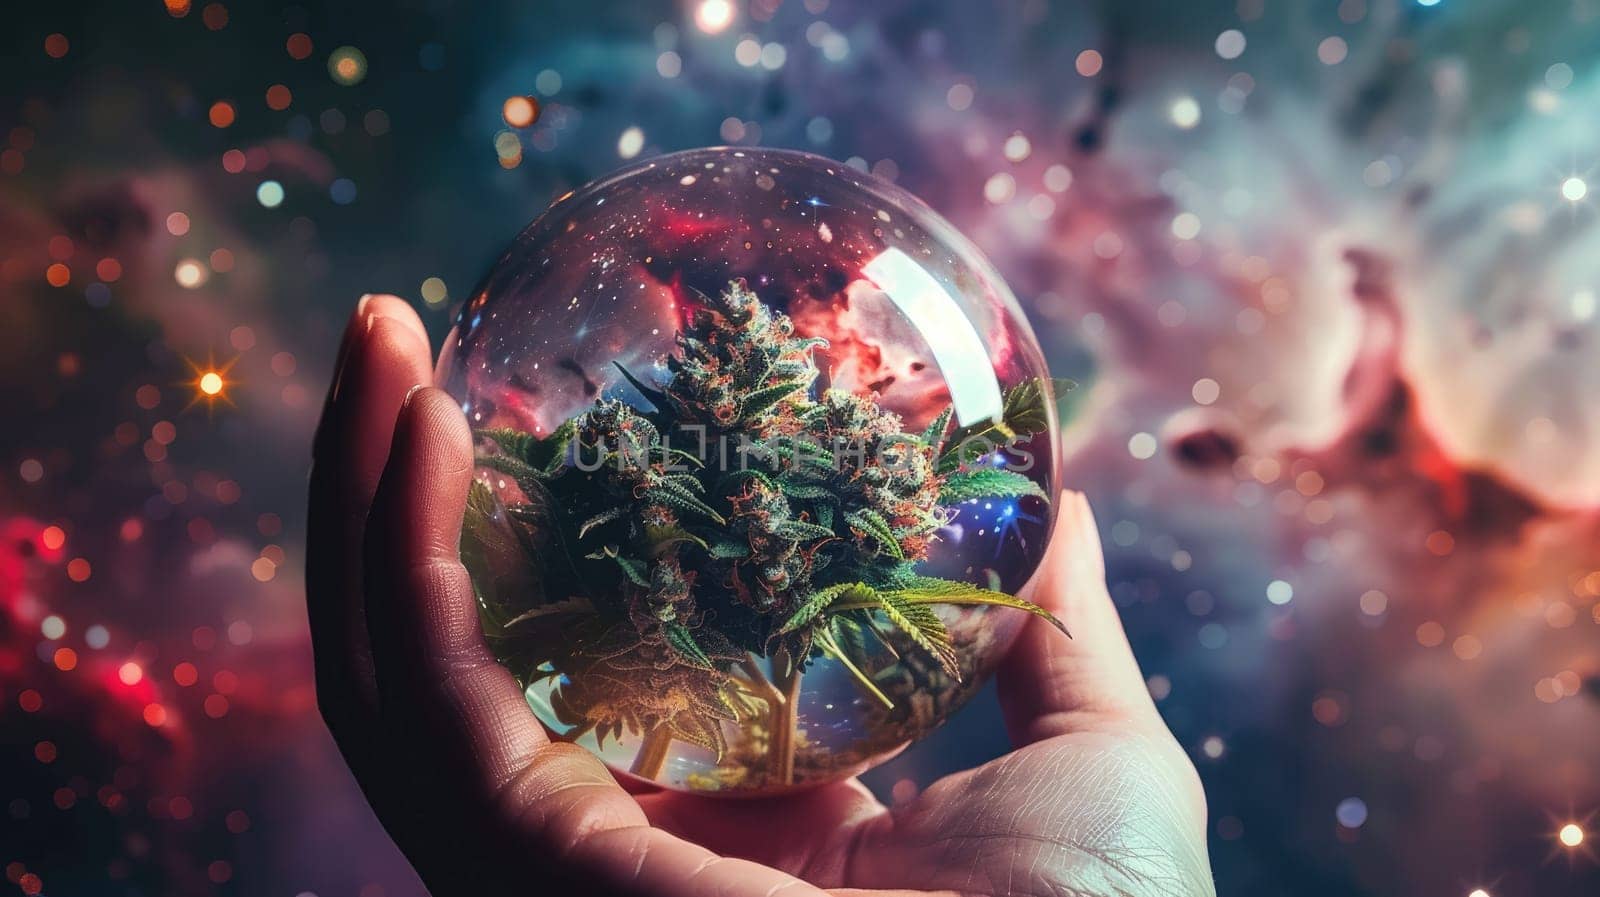 A hand holding a glass with a cannabis in it with galaxy background.